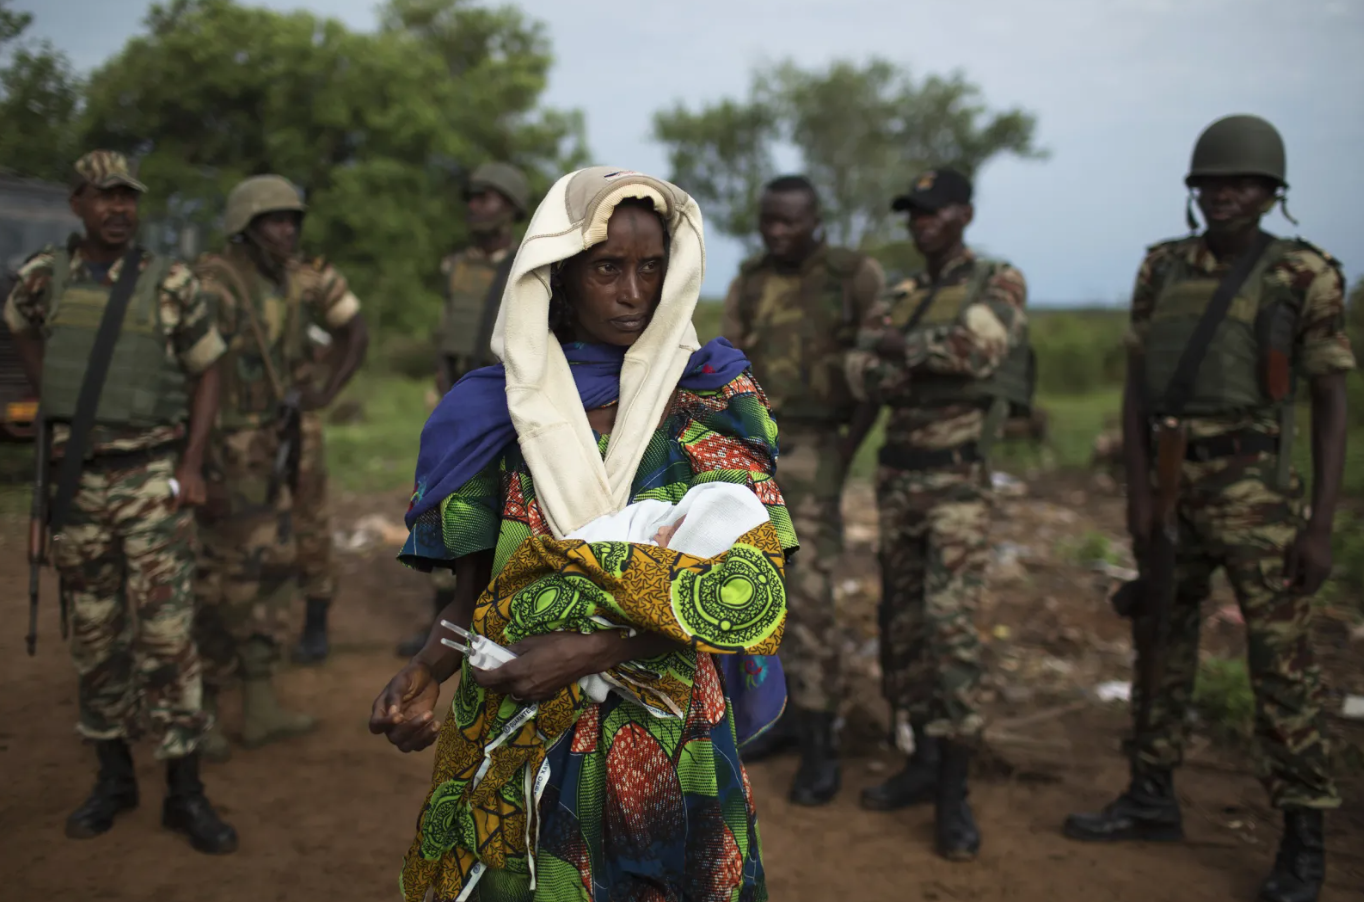 The relative of a woman that recently gave birth yesterday to twins holds one of the babies before departing towards Chad's border, escorted by troops from the African Union operation in CAR (MISCA) in the northern town of Kaga Bandoro, April 29, 2014. Siegfried Modola / Reuters